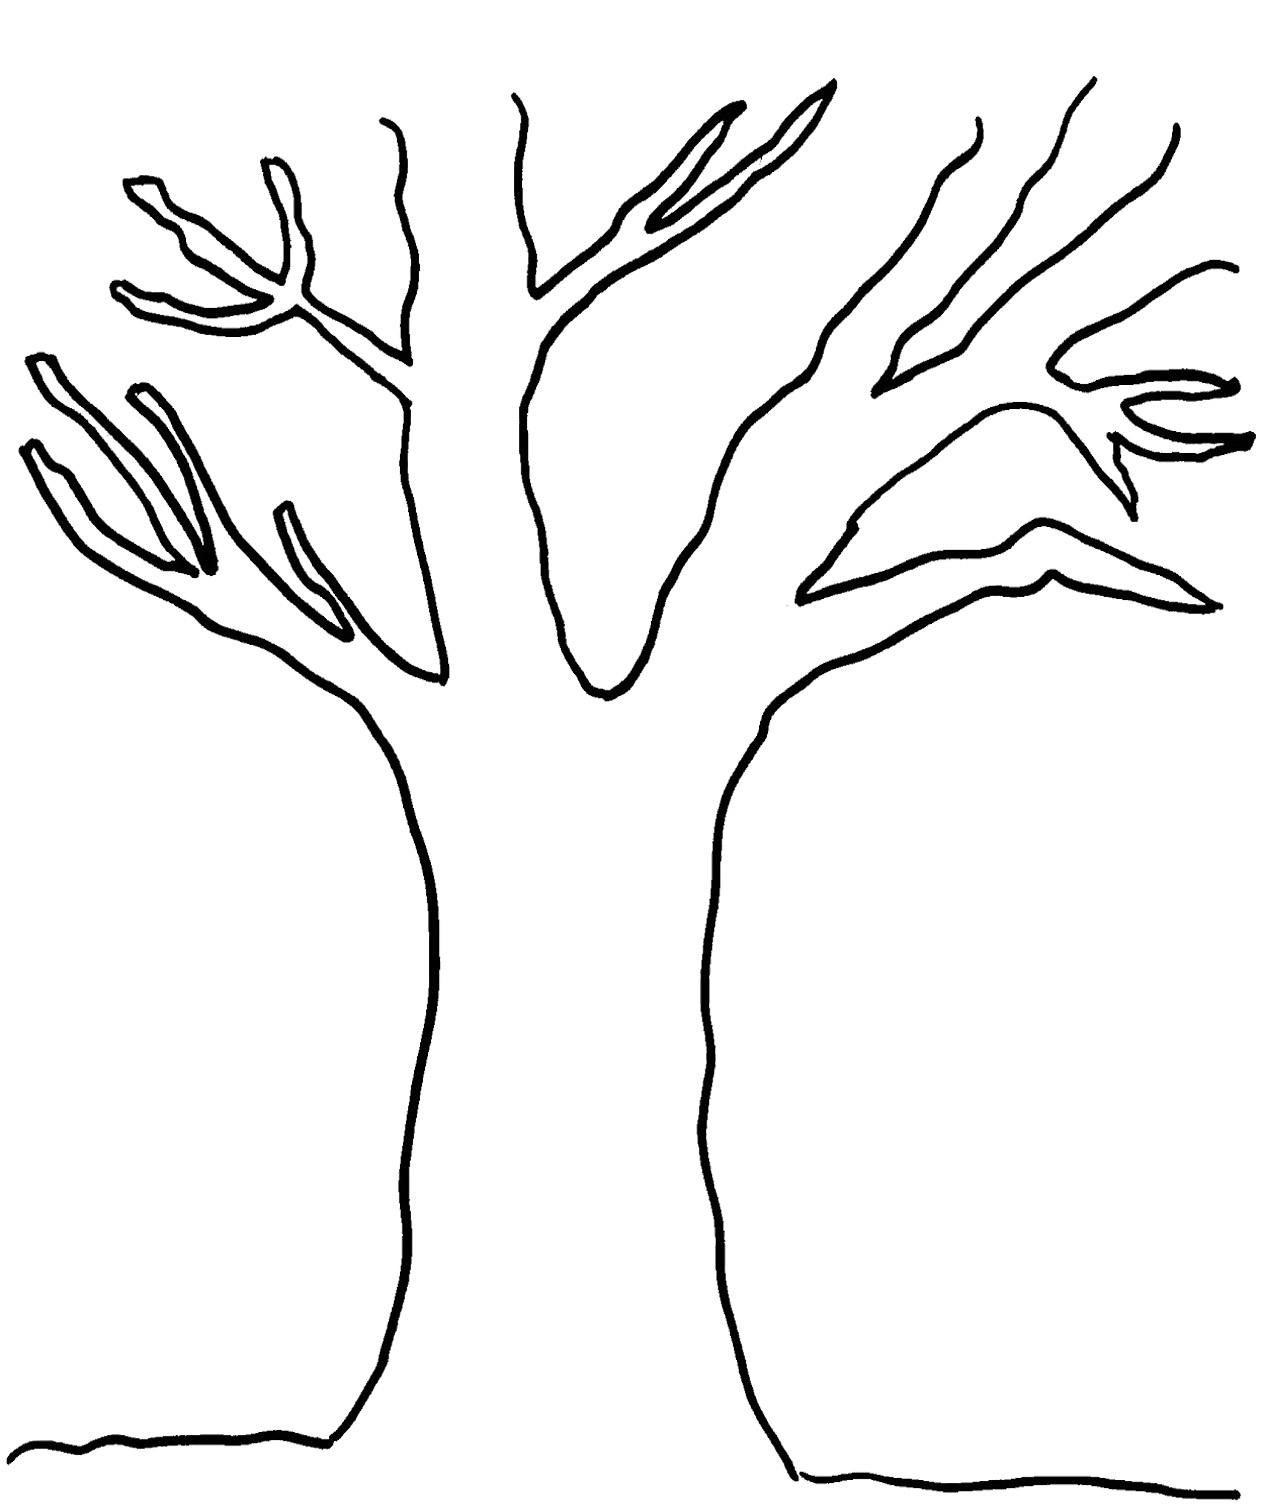 Tree Trunks coloring, Download Tree Trunks coloring for free 2019